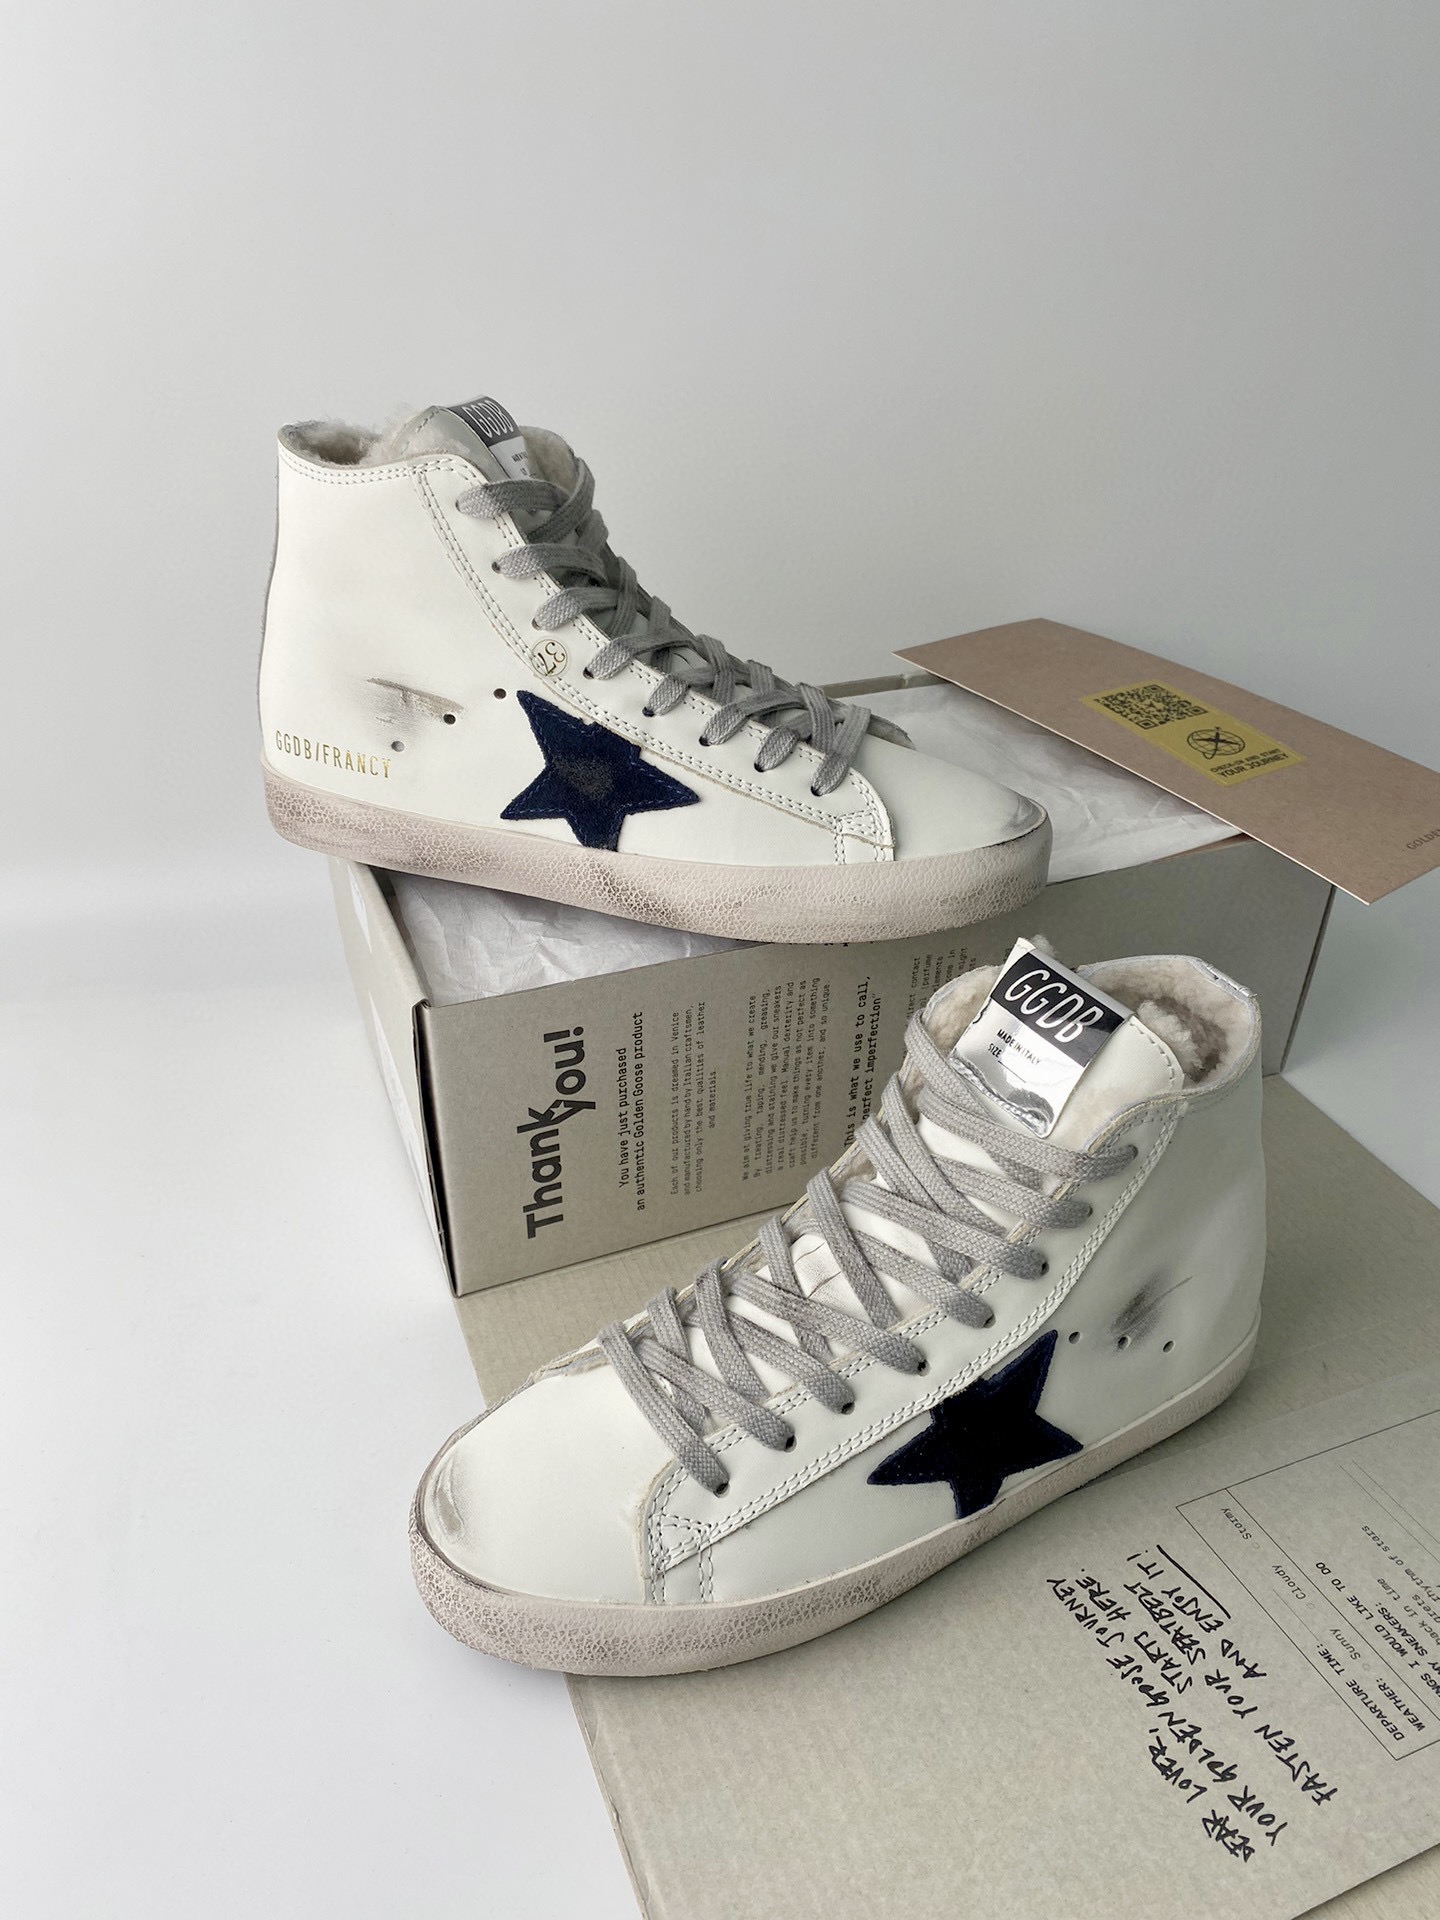 Golden Goose Francy in white suede with black leather star Fleece Lined Sneaker Unisex # 274271, cheap Golden Goose Sneaker, only $95!